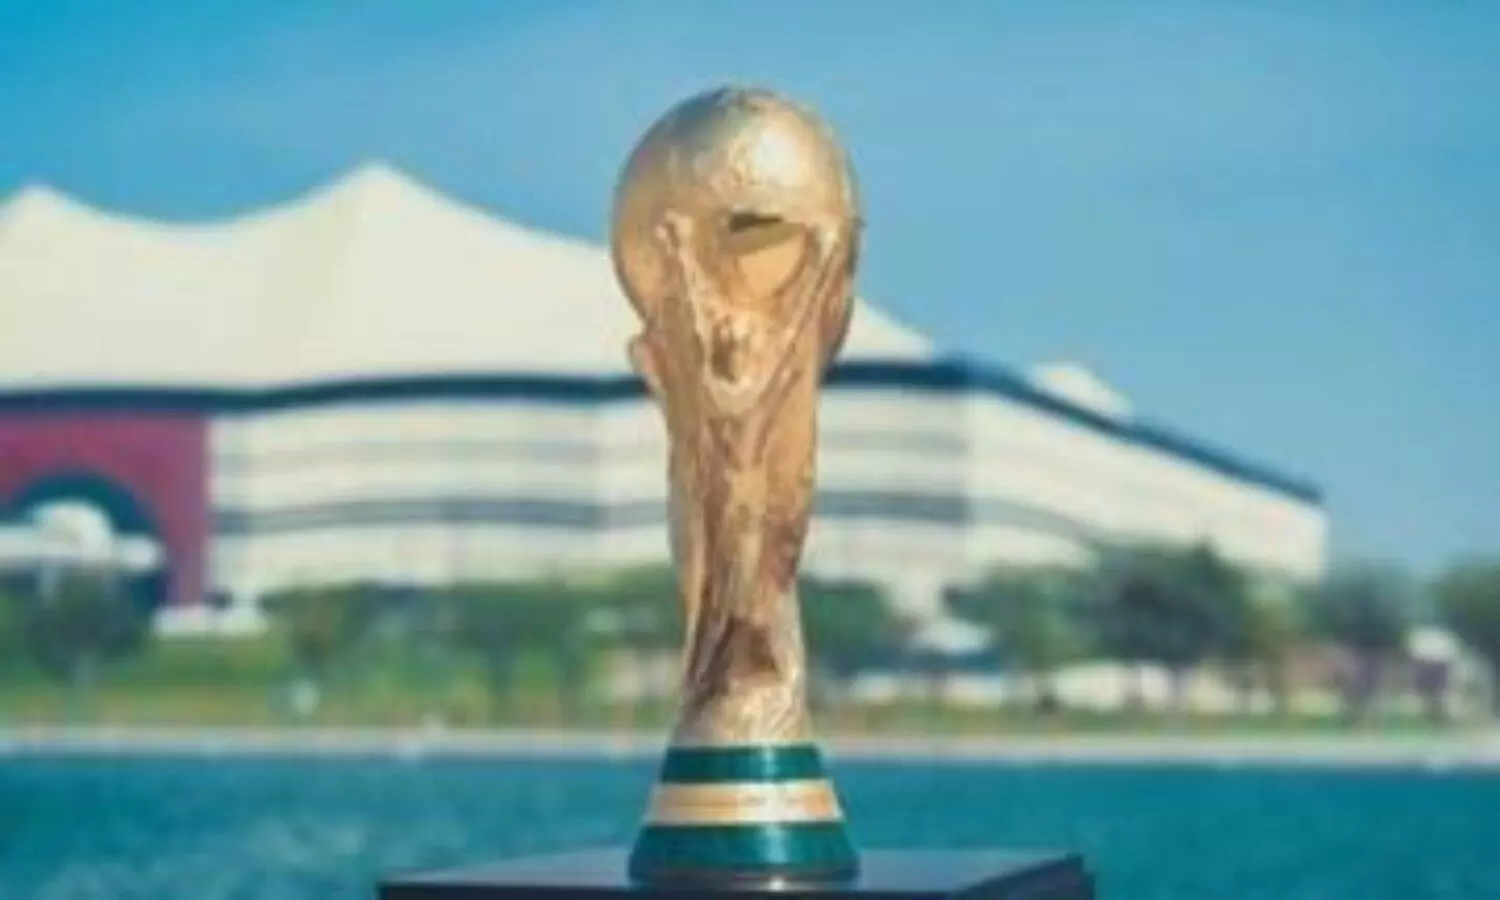 FIFA World Cup date